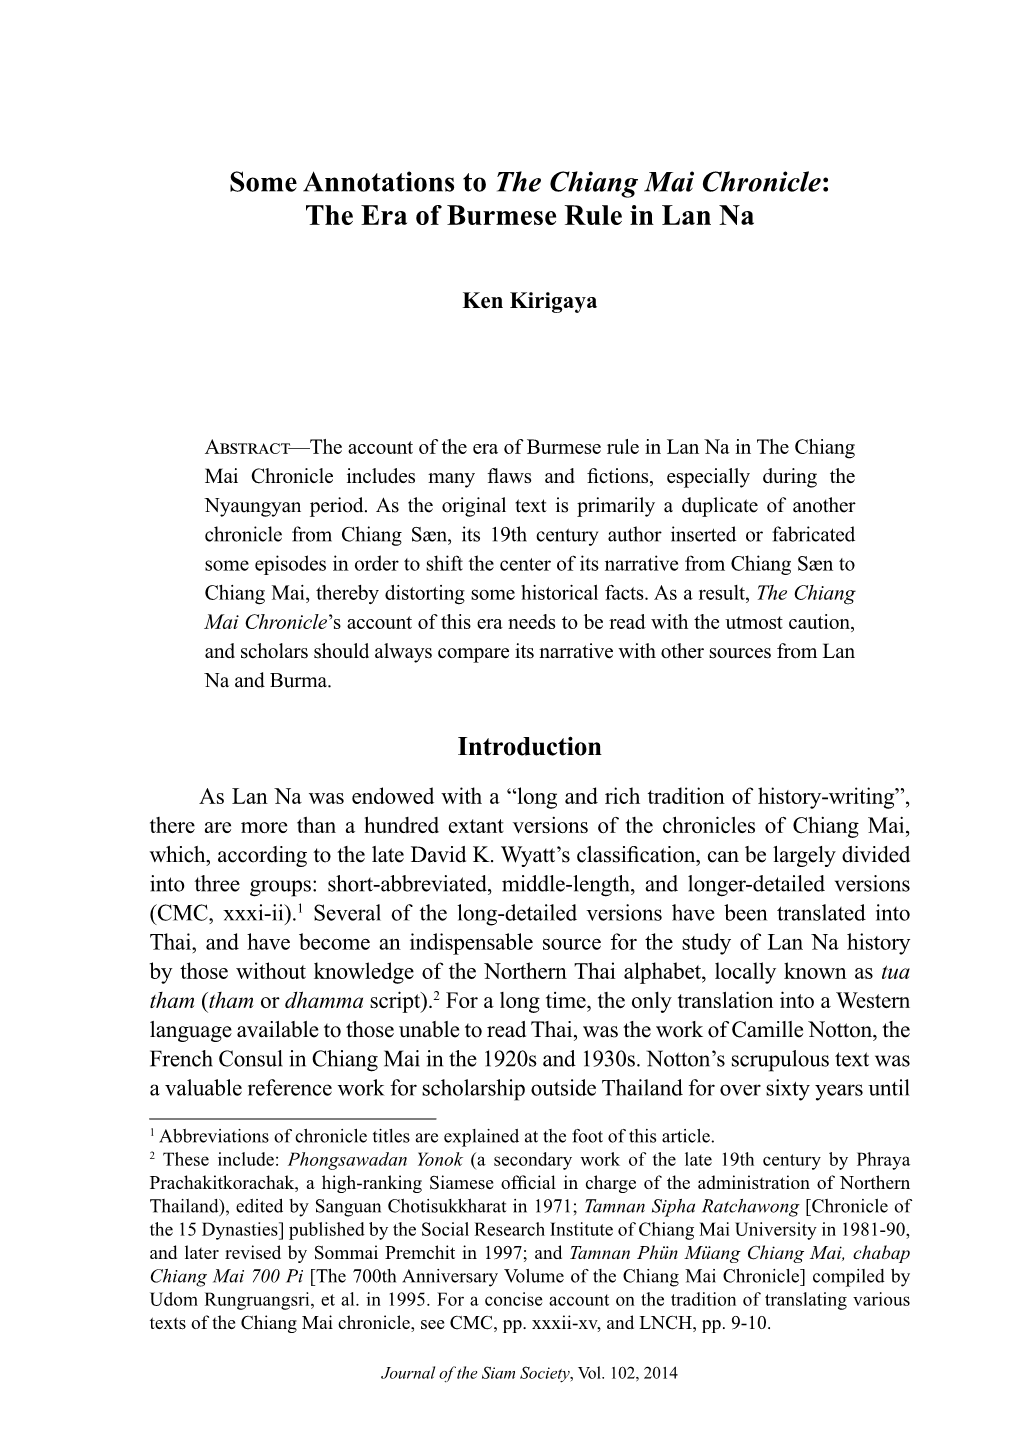 Some Annotations to the Chiang Mai Chronicle: the Era of Burmese Rule in Lan Na